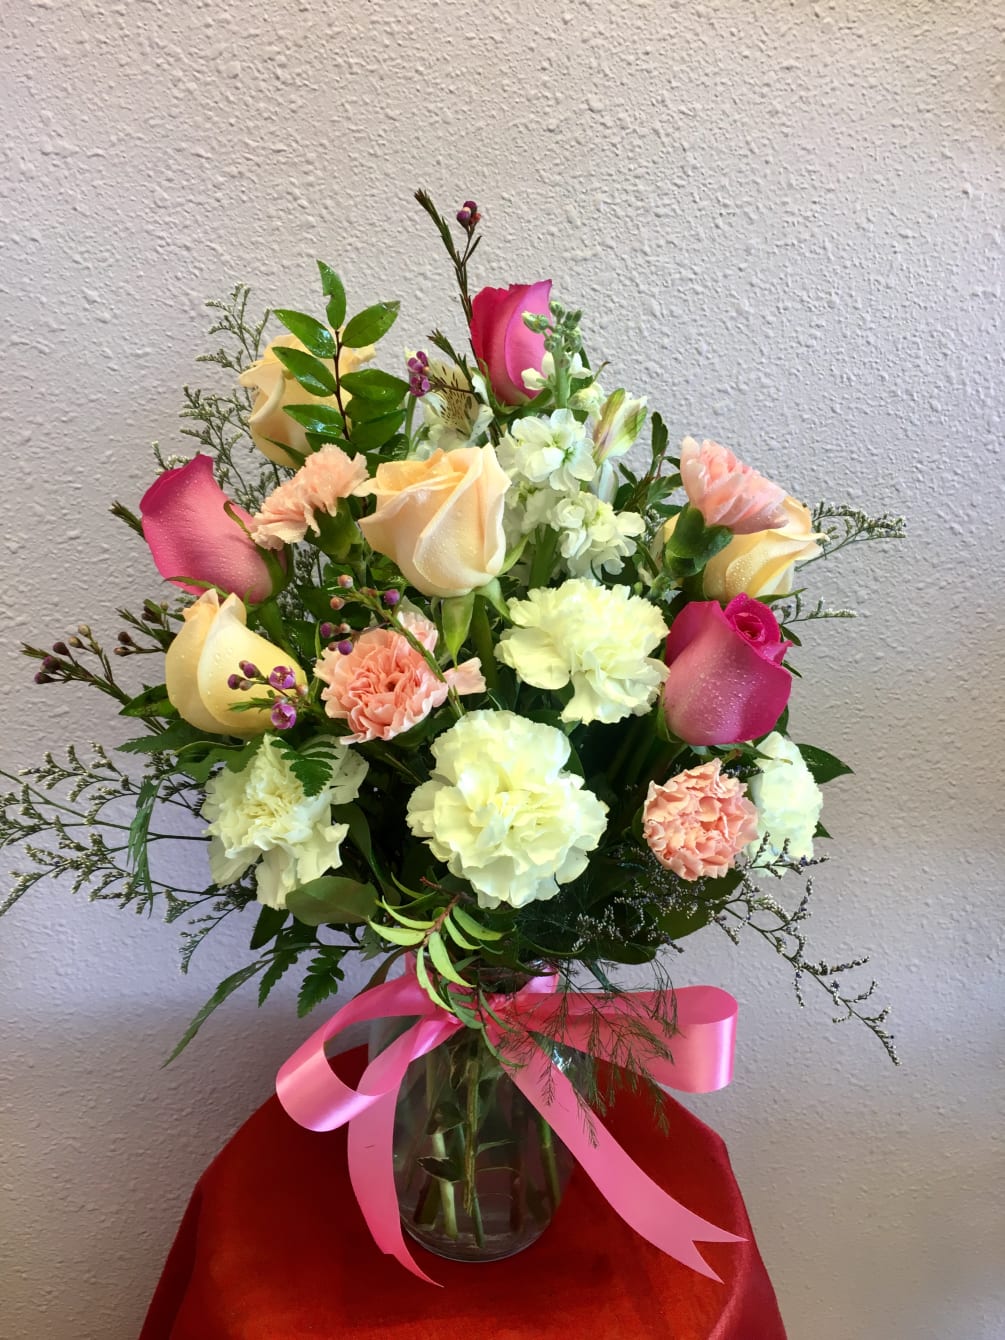 This rose and carnation assortment is sure to bring that rosy color